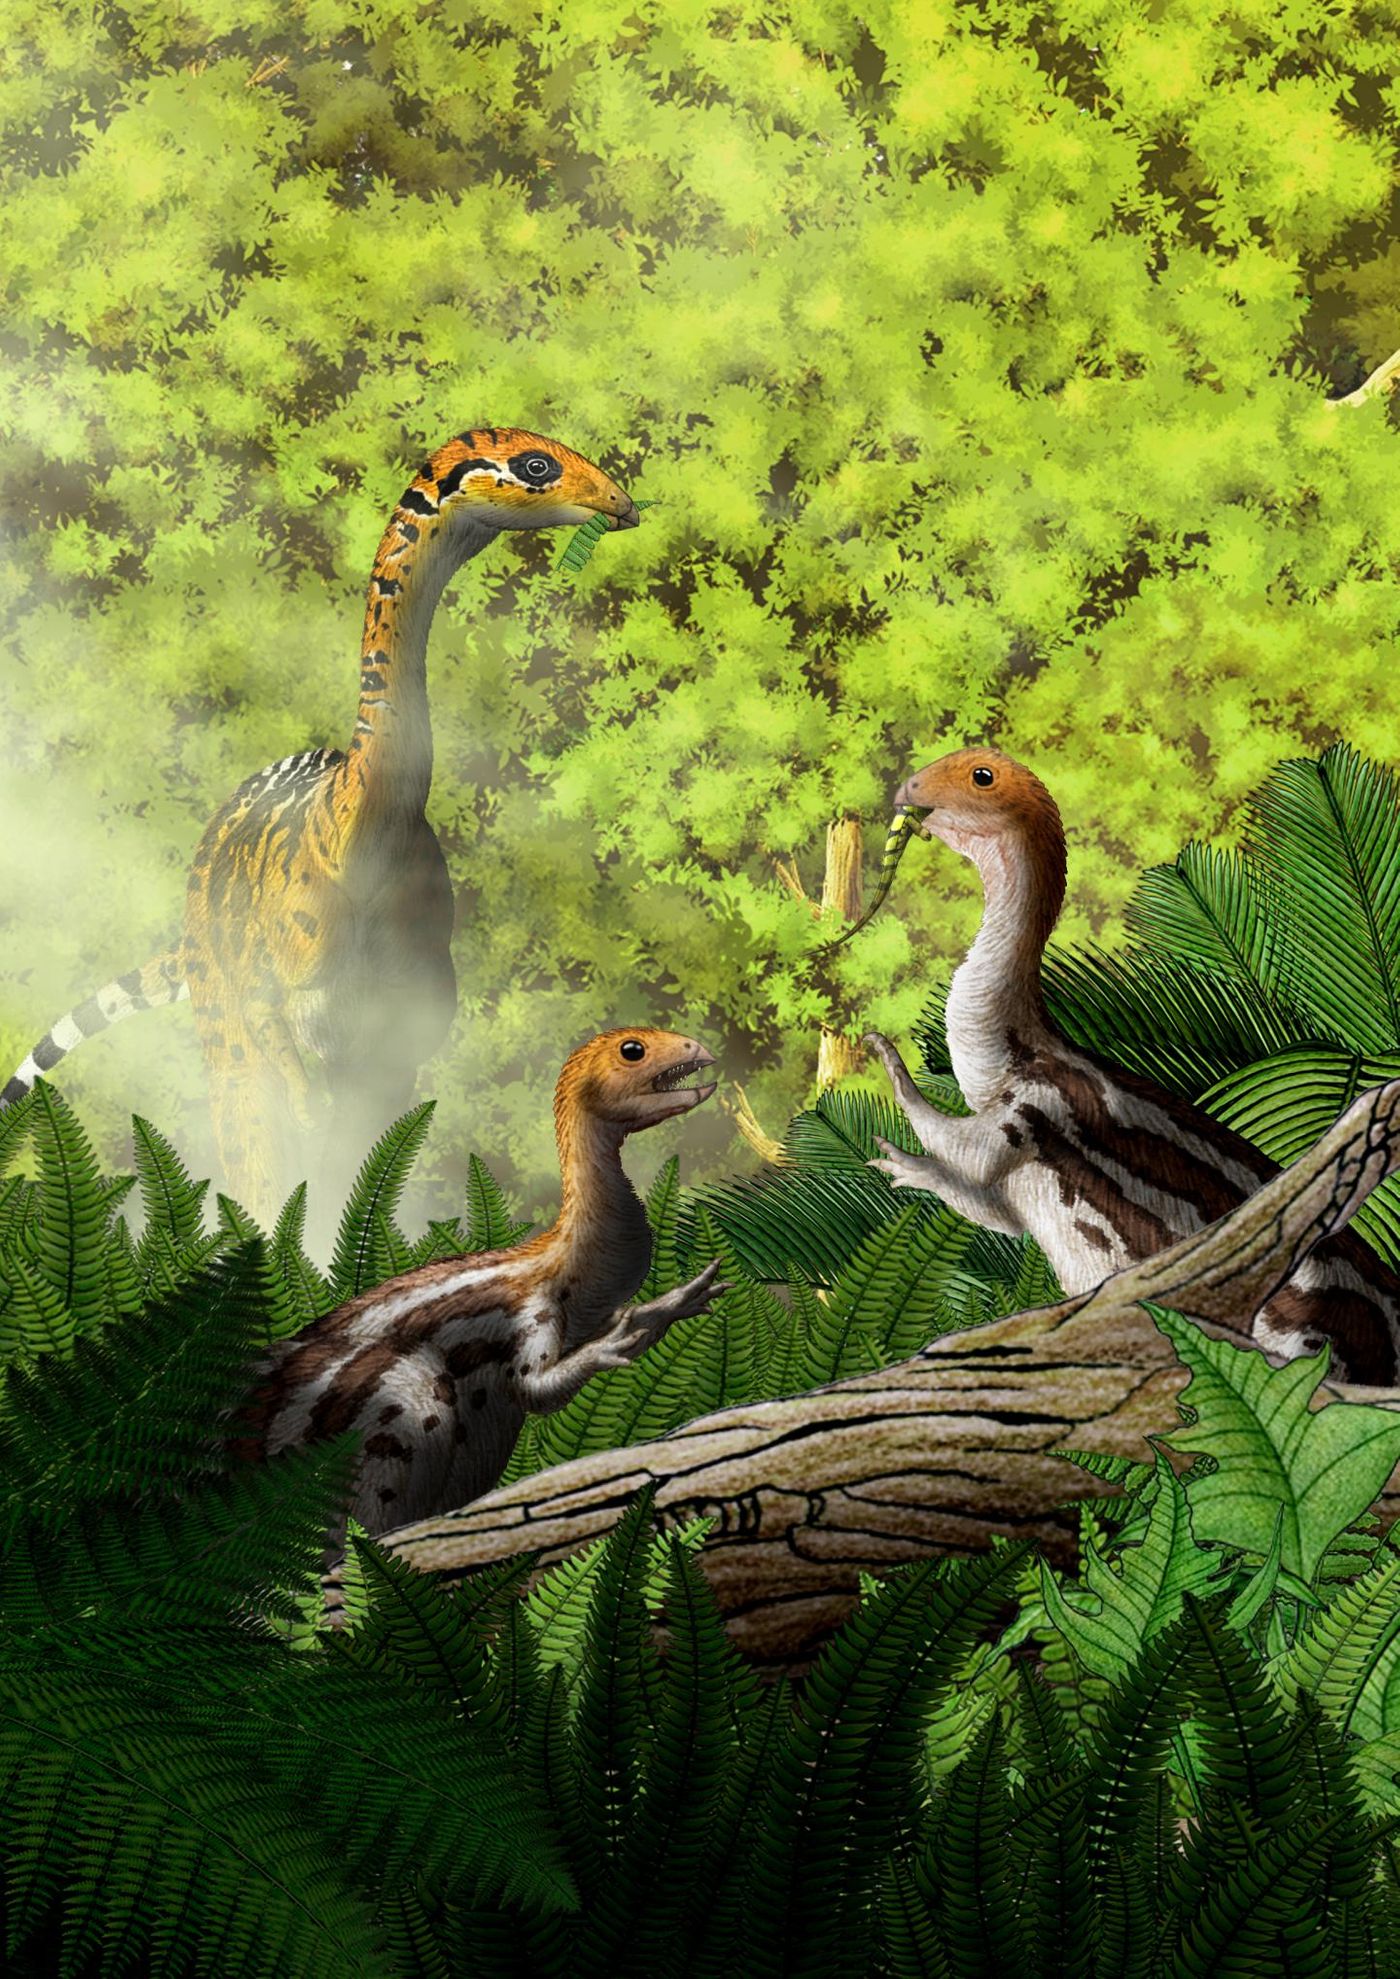 An artist's rendition of the Limusaurus.